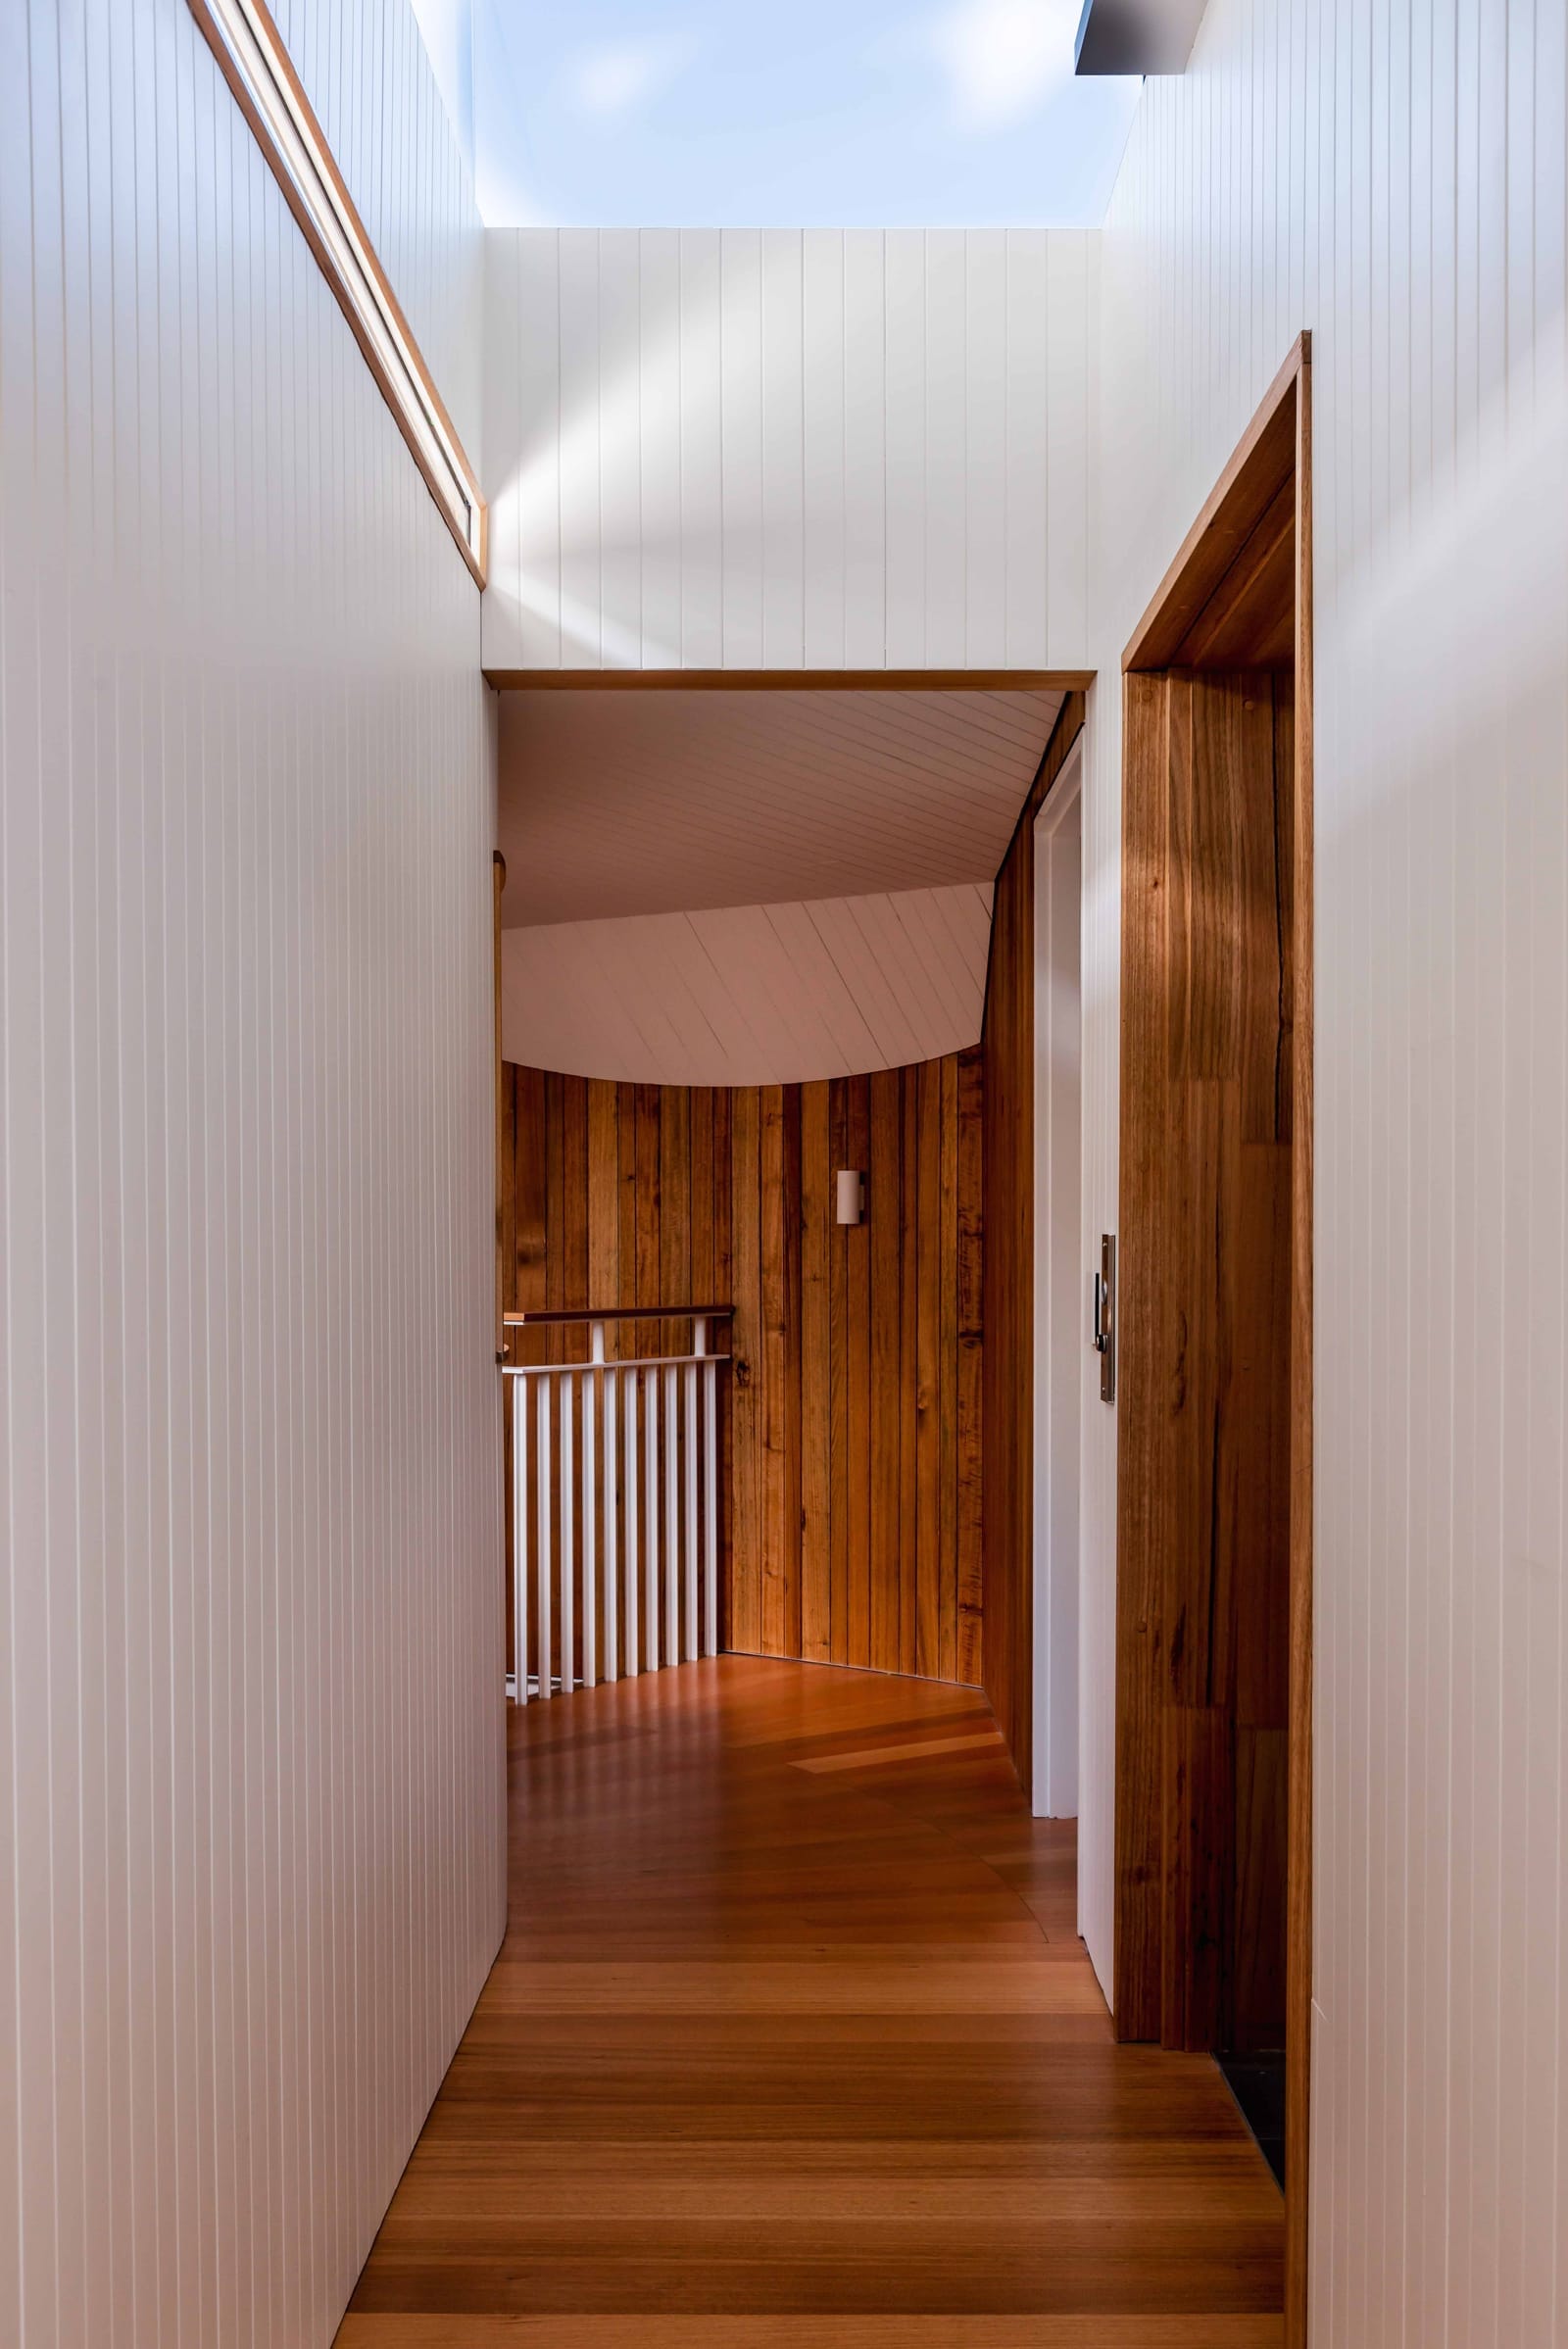 Wattle Bird House by Flett Architecture. Photography by Matt Sansom. Hallway with polished timber floors and white timber clad walls. White metal staircase balustrade at end of hallway. 